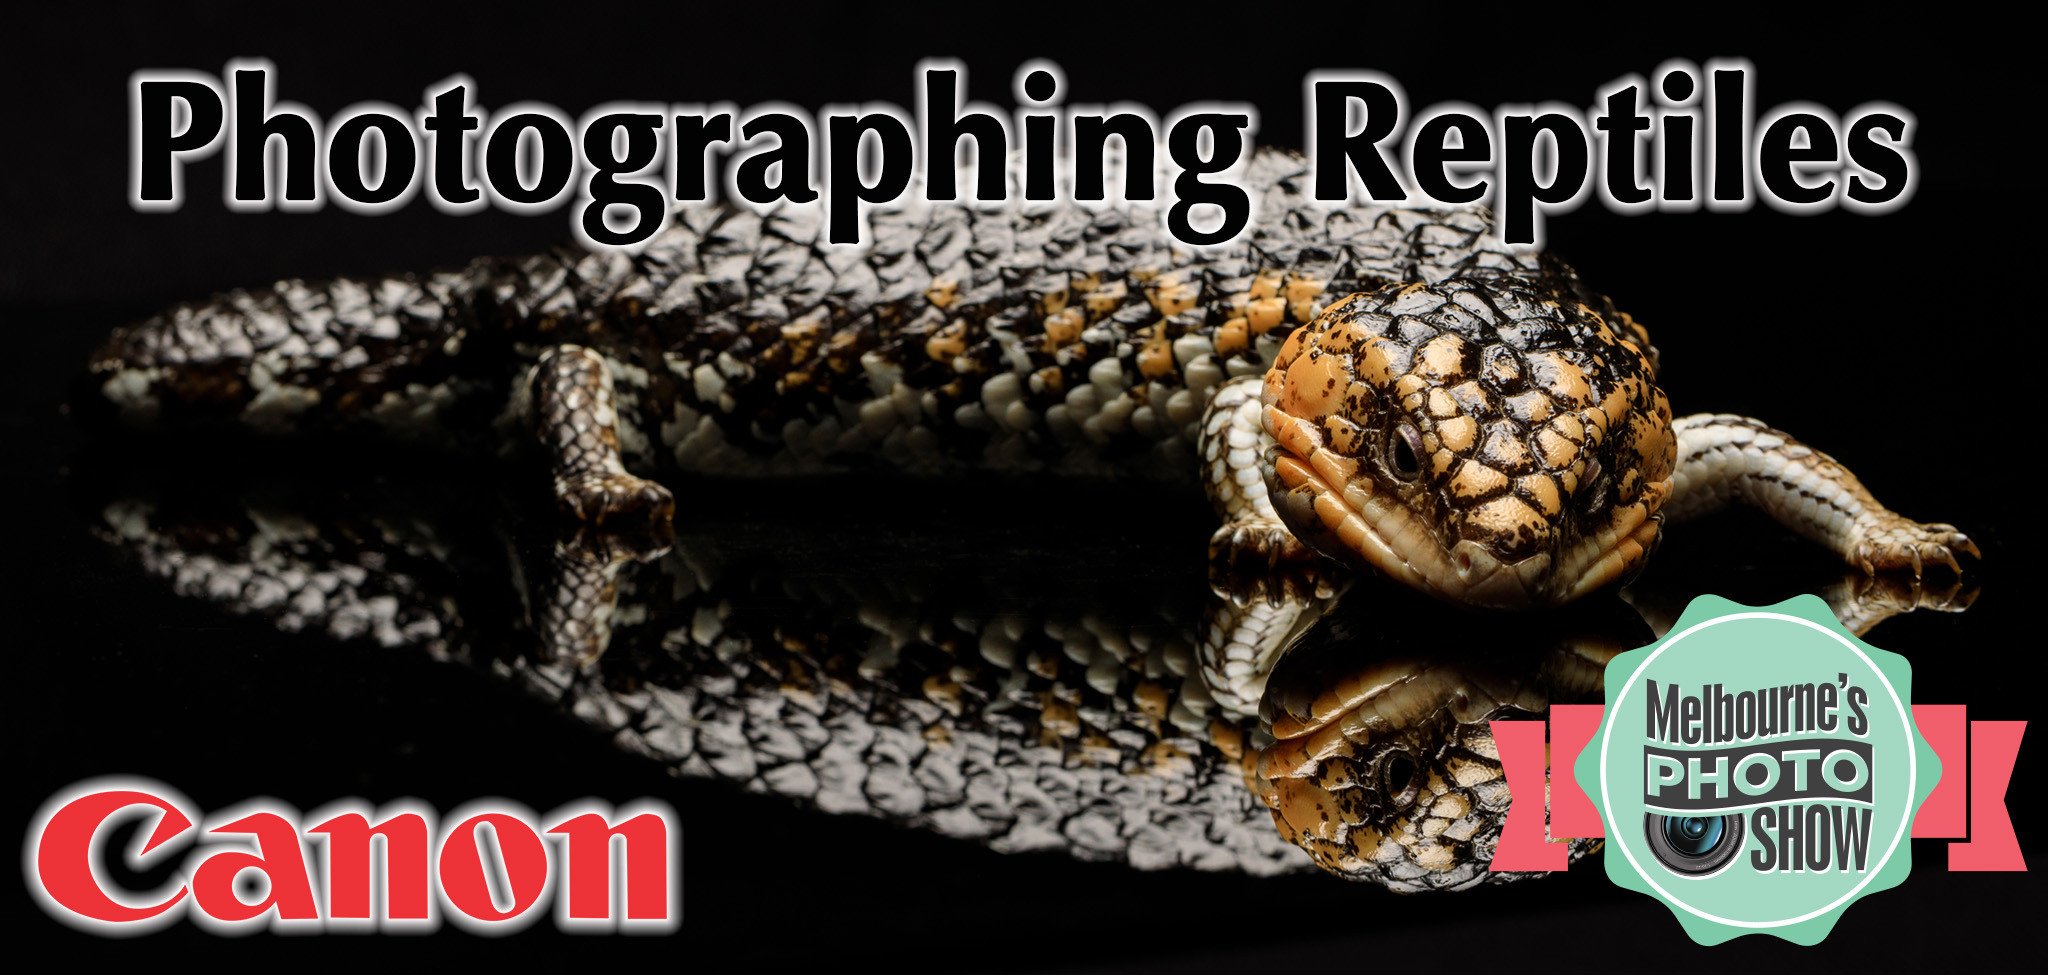 Photographing Reptiles - Free Event all Day - Saturday 8th April